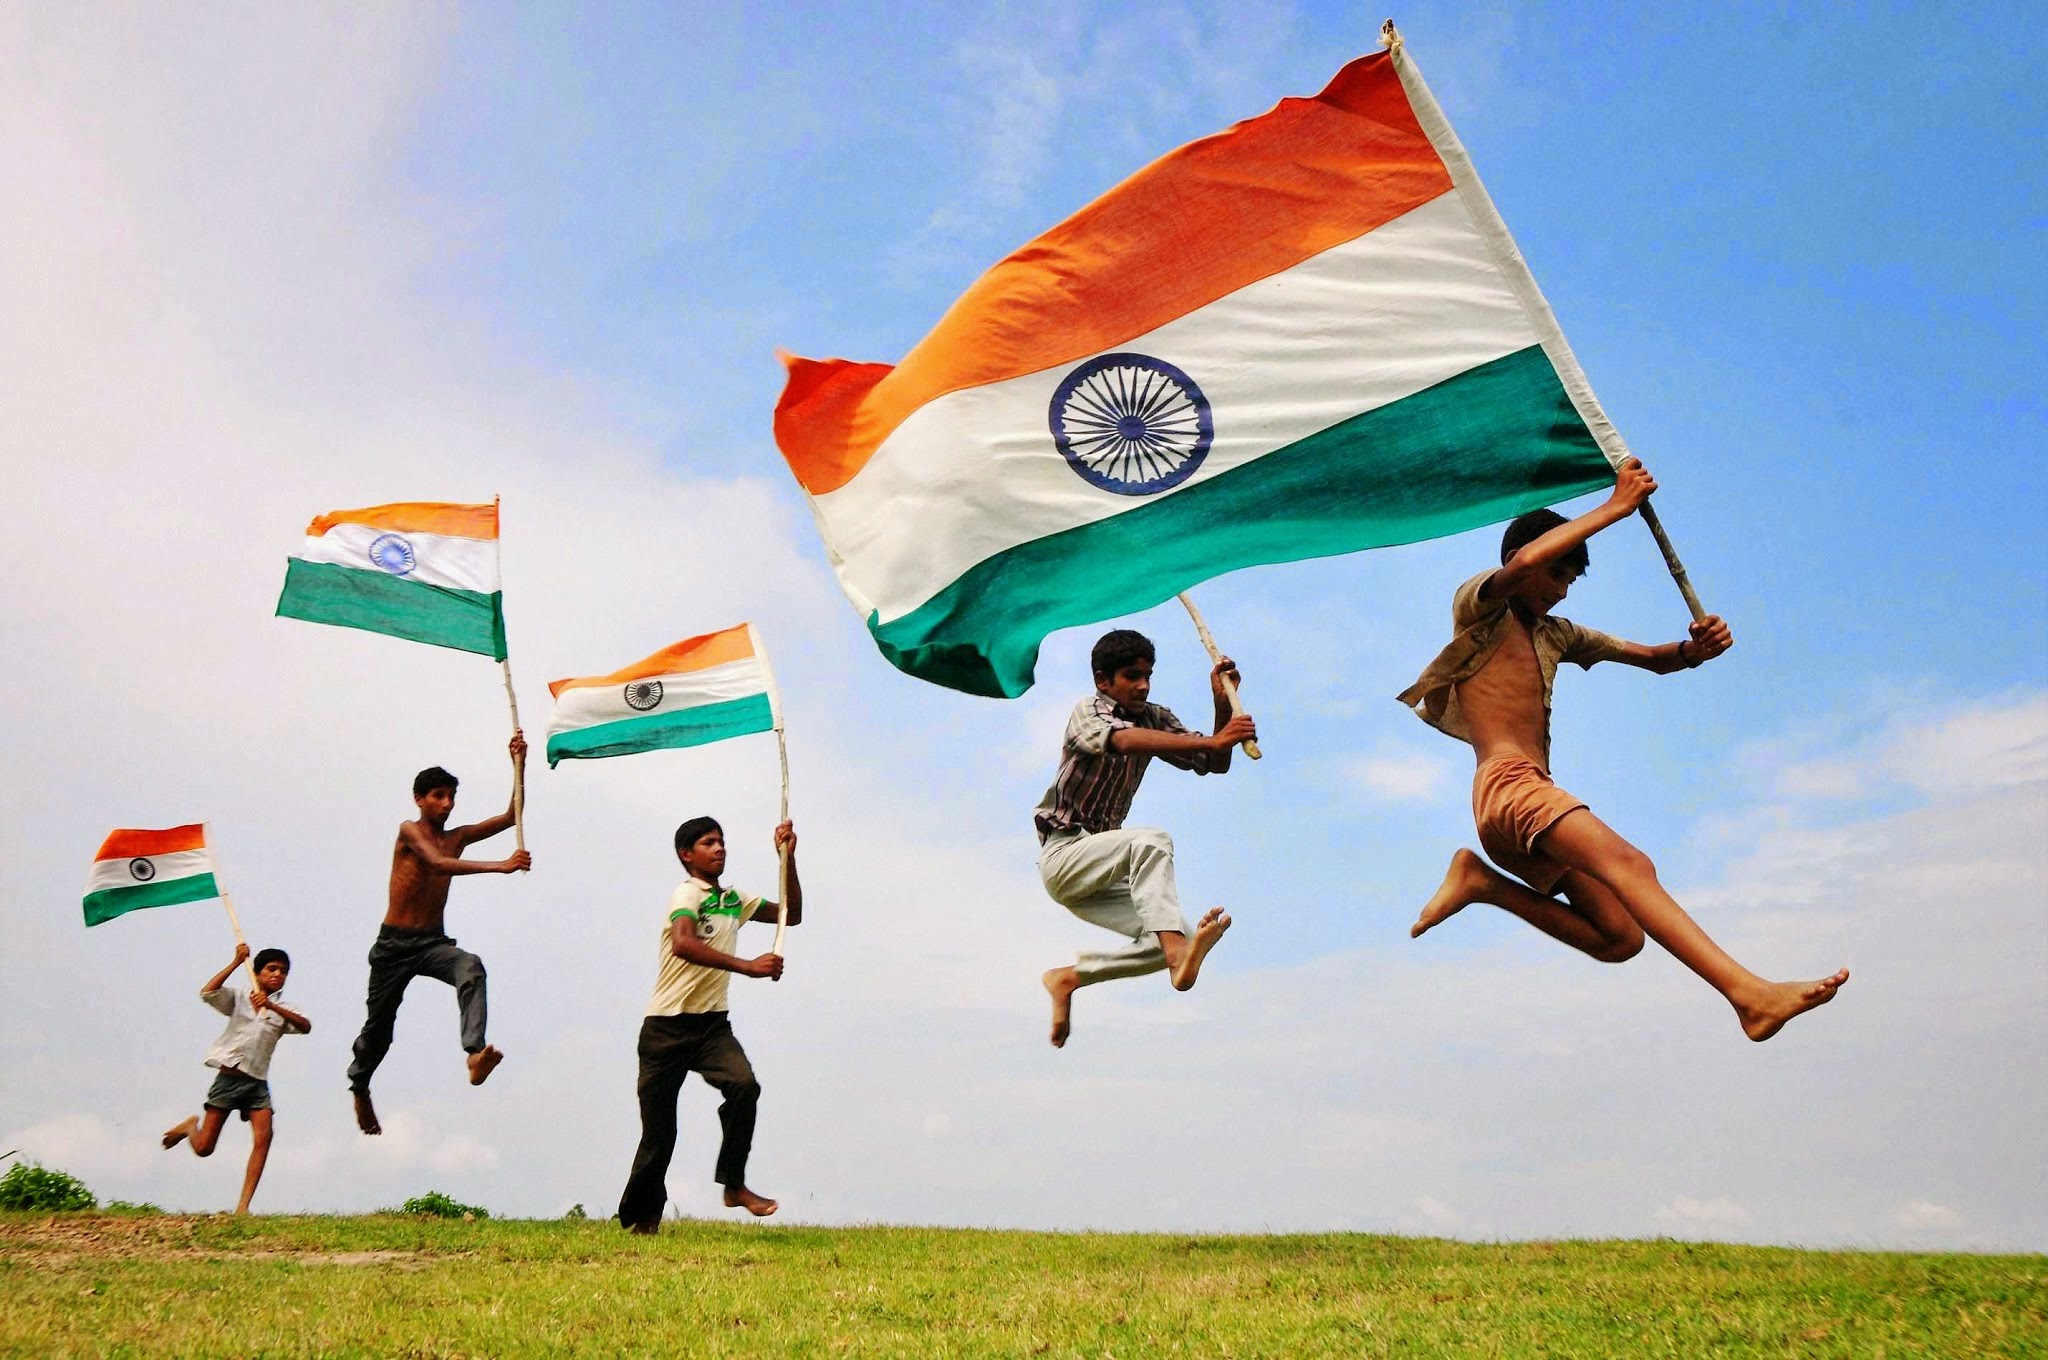 Don’t use national flag made of plastic, follow code of paper flags: Govt